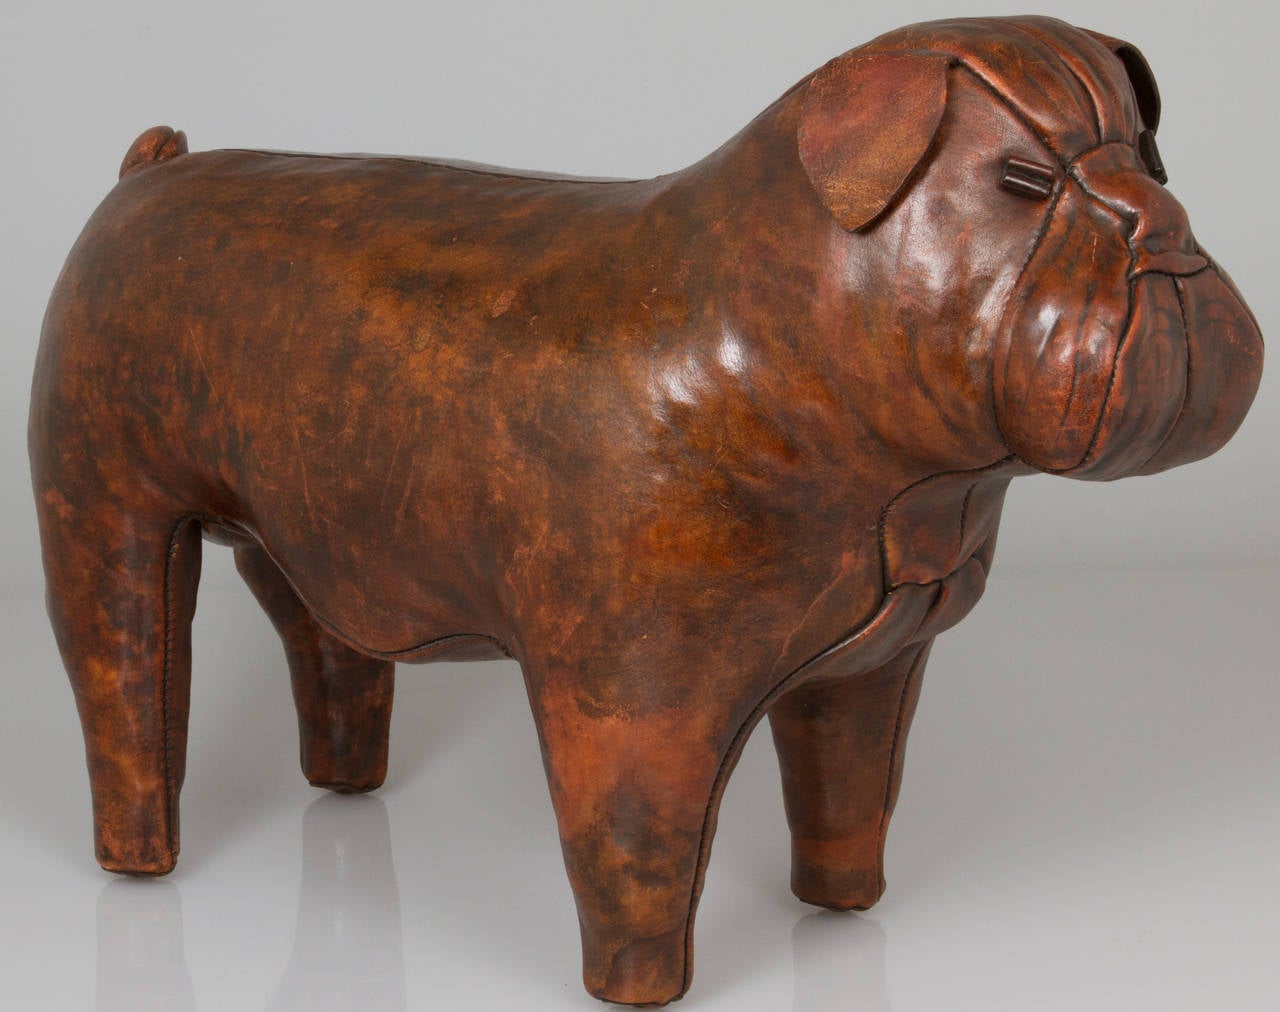 Great Britain (UK) Vintage Bulldog Sculpture by Omersa for Abercrombie & Fitch For Sale